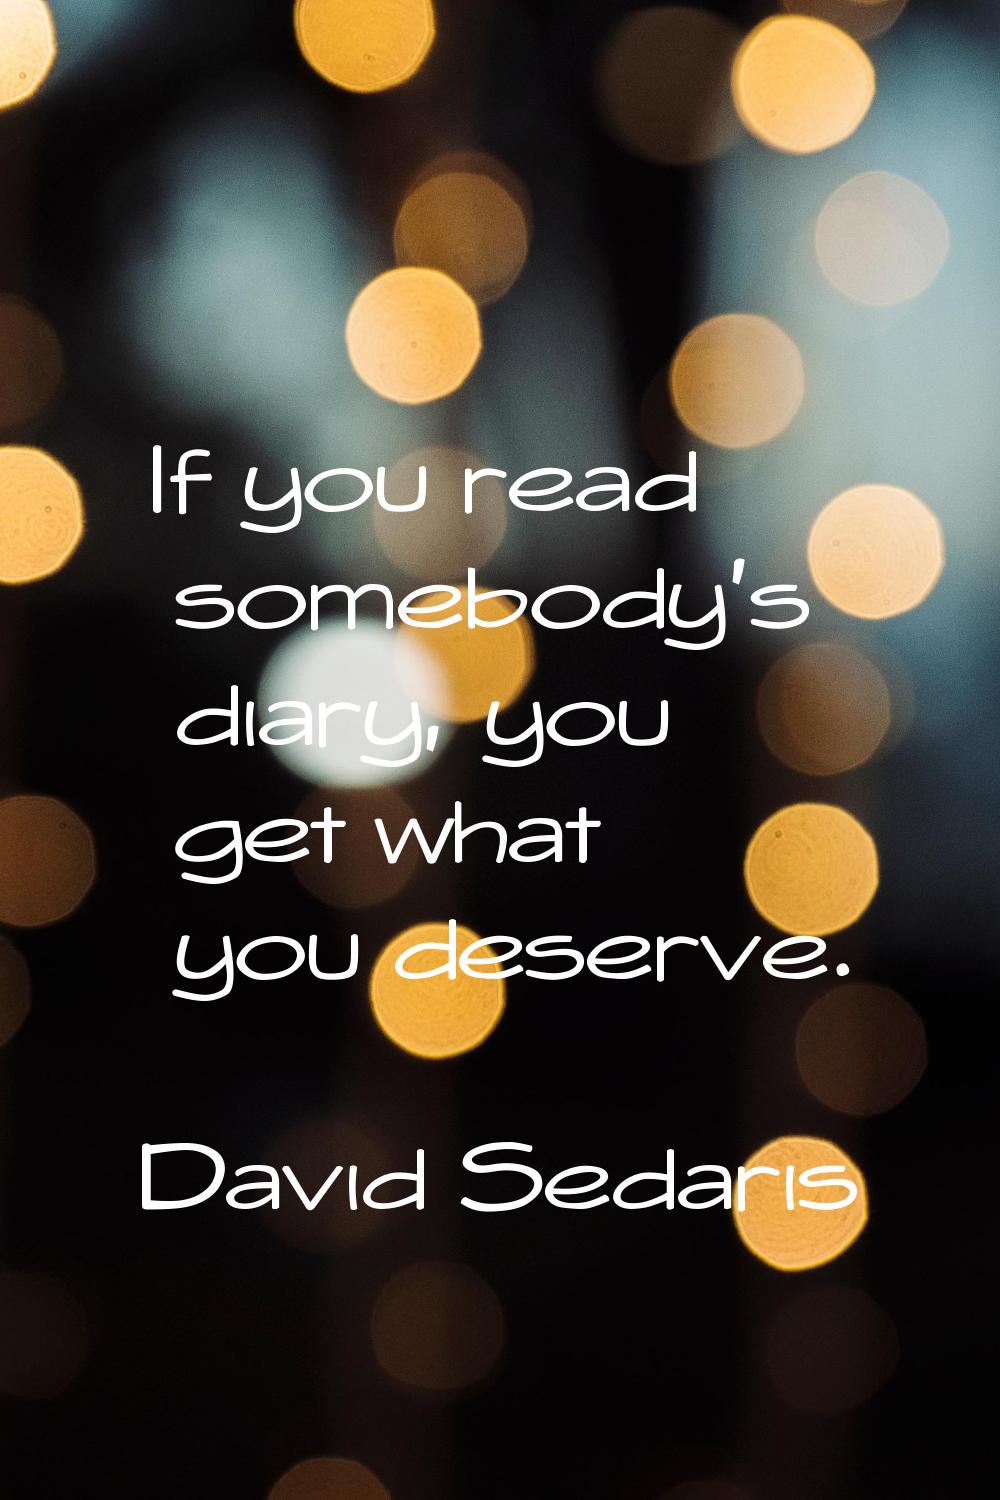 If you read somebody's diary, you get what you deserve.